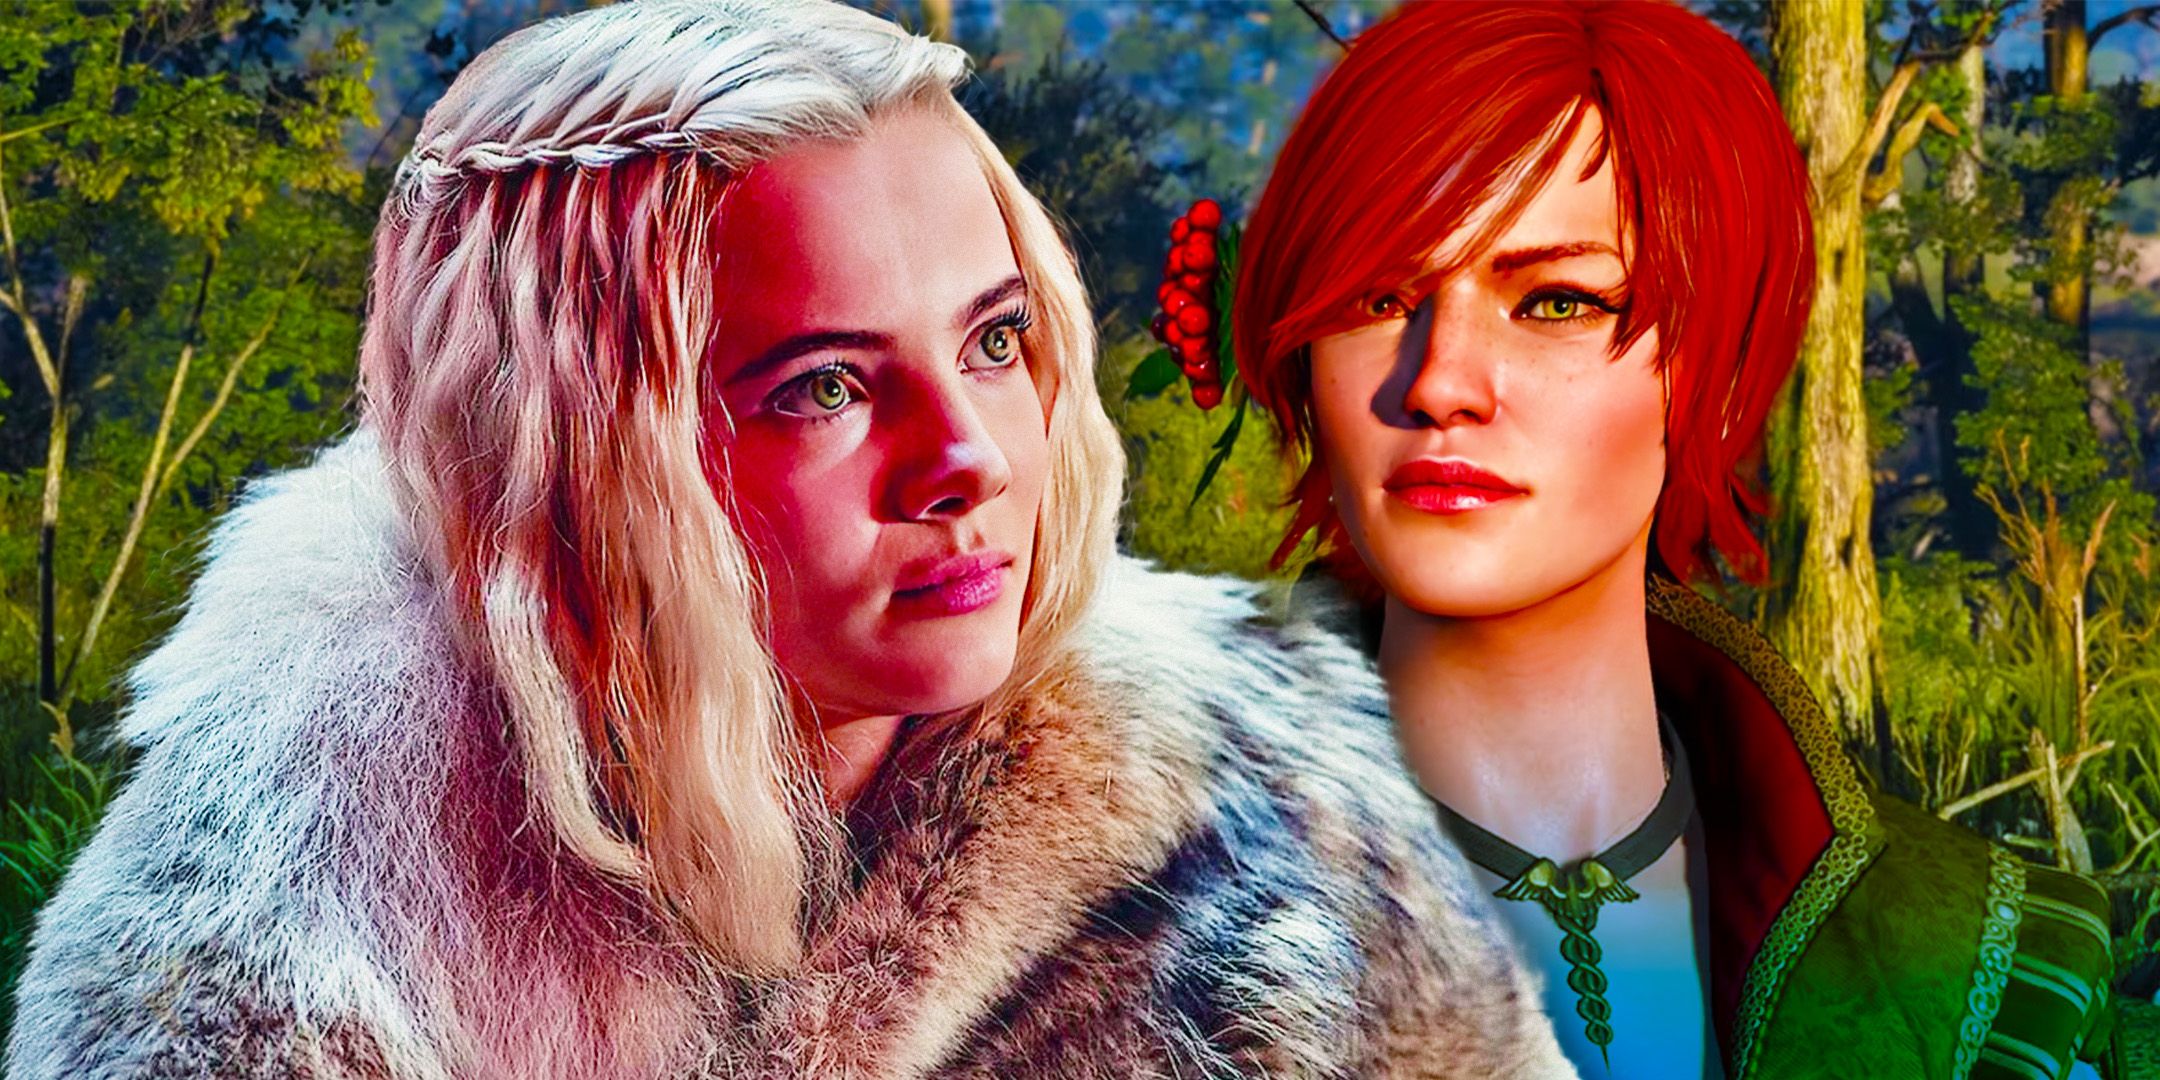 10 Characters The Witcher Must Introduce Before Season 5 Ends The Show